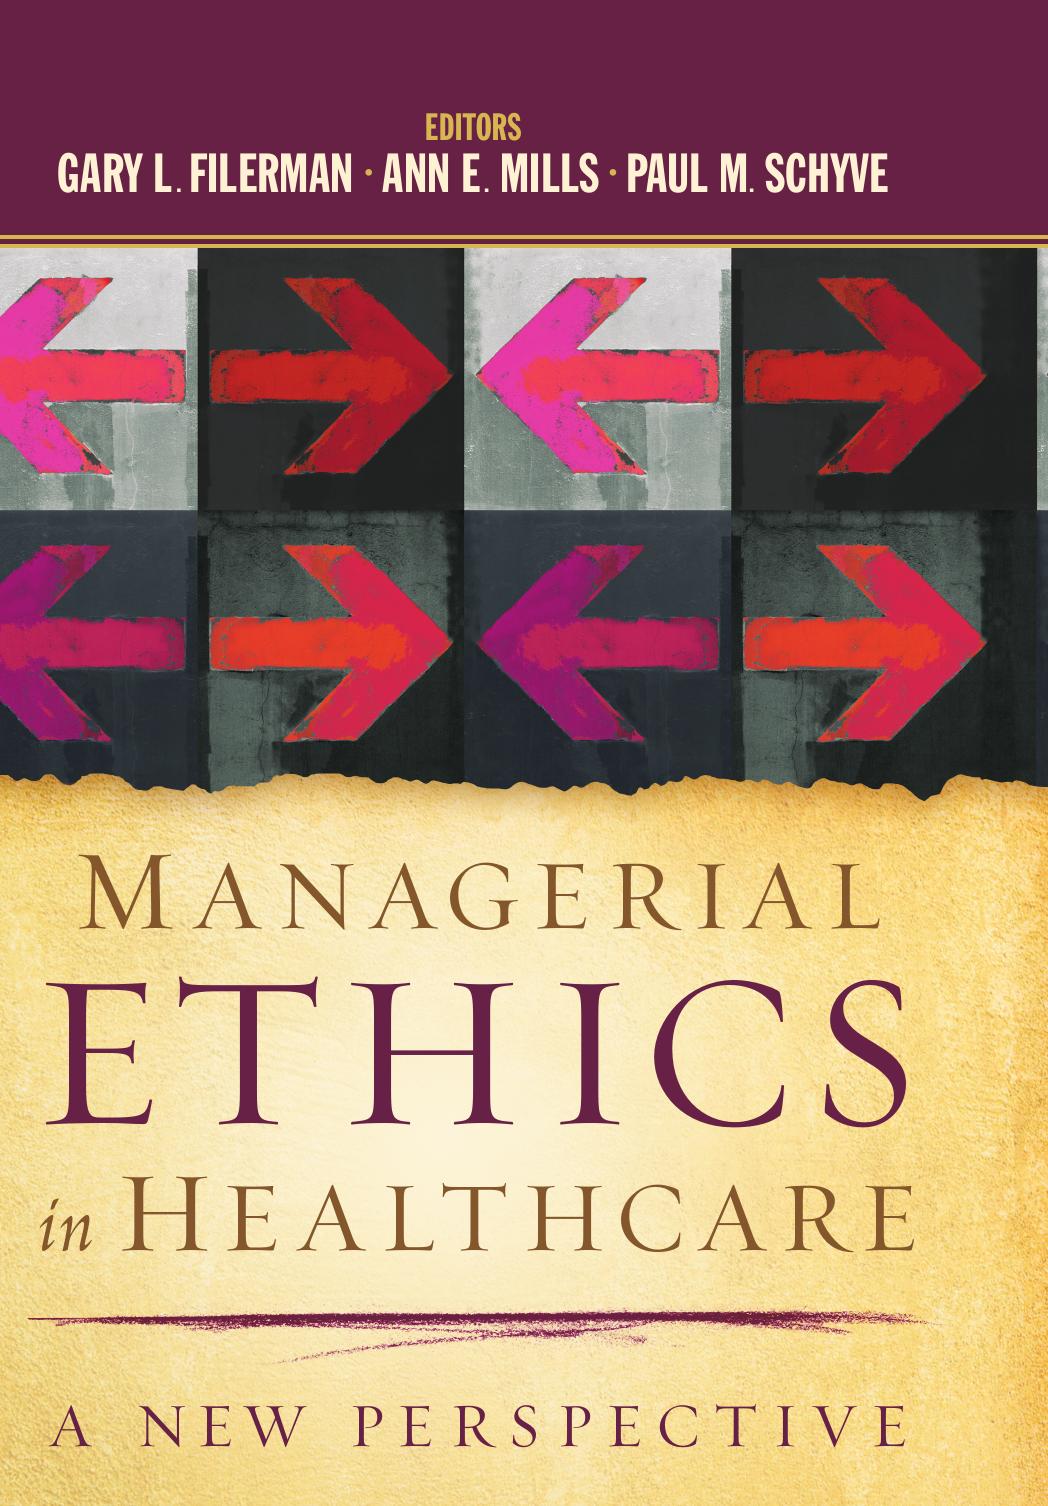 Managerial Ethics in Healthcare: A New Perspective by Gary Filerman; Ann E. Mills; Paul M. Schyve